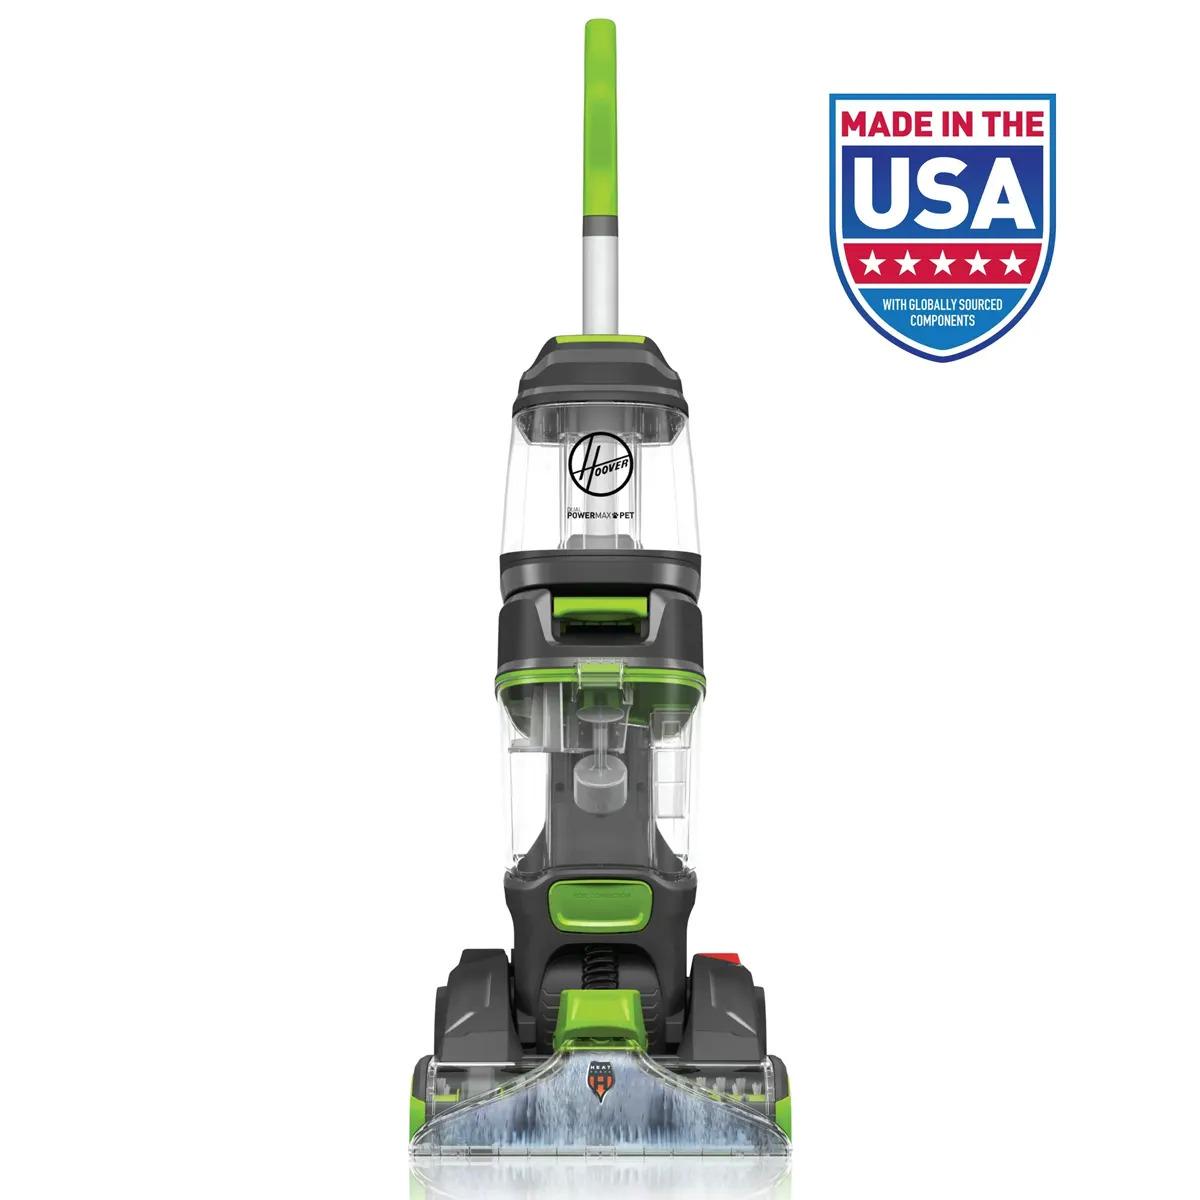 Hoover Dual Power Max Pet Upright Carpet Cleaner Machine for $97 Shipped